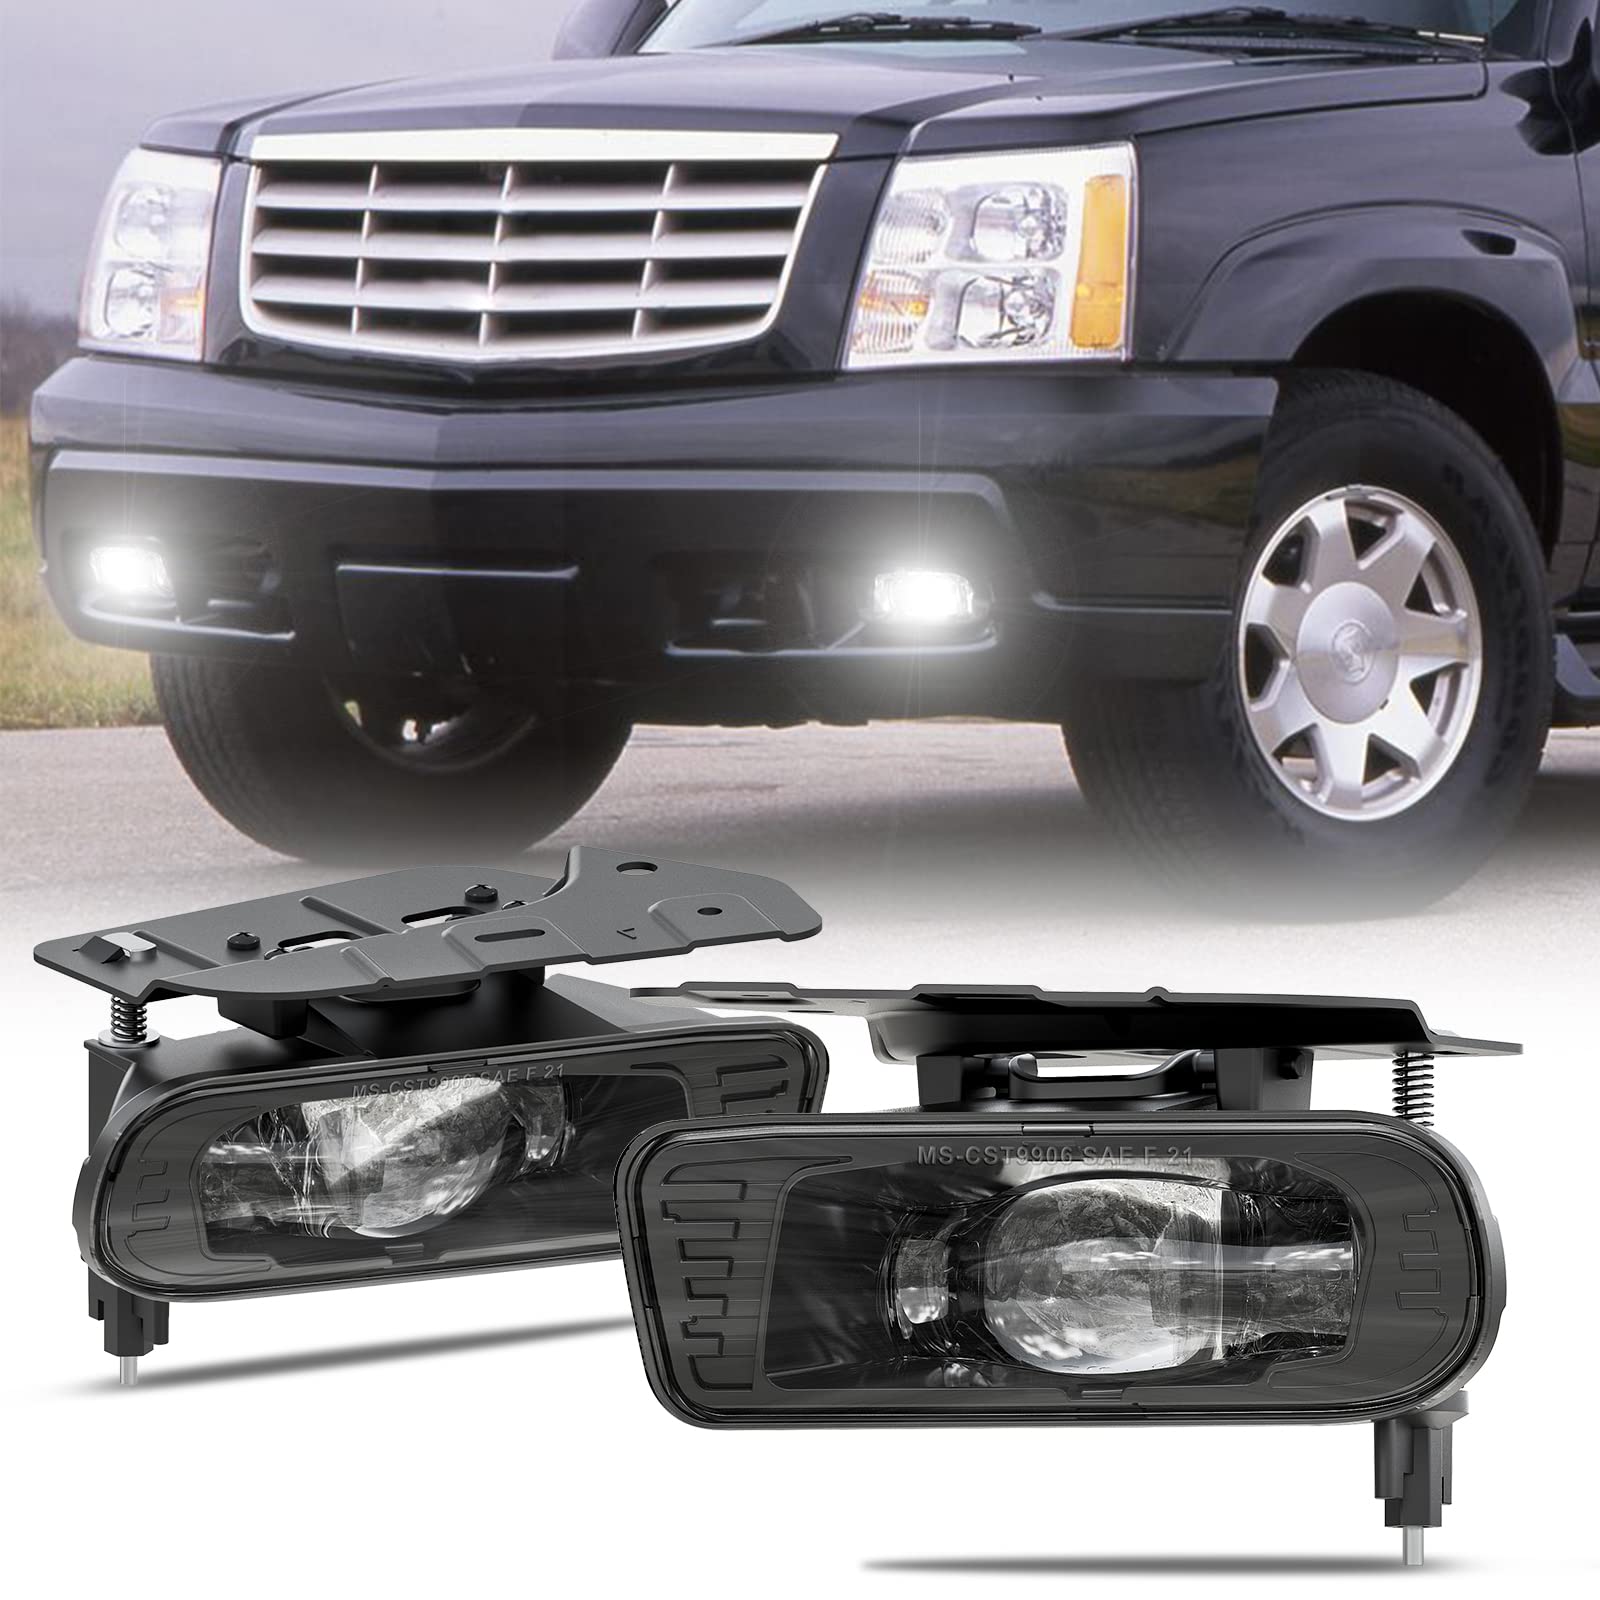 BICYACO LED Fog Lights Assembly Compatible with 2002 2003 2004 2005 2006 Cadillac  Escalade 02 03 04 05 06 Escalade EXT 2003-2006 Escalade ESV Fog Lamps  Replacement Clear Lens